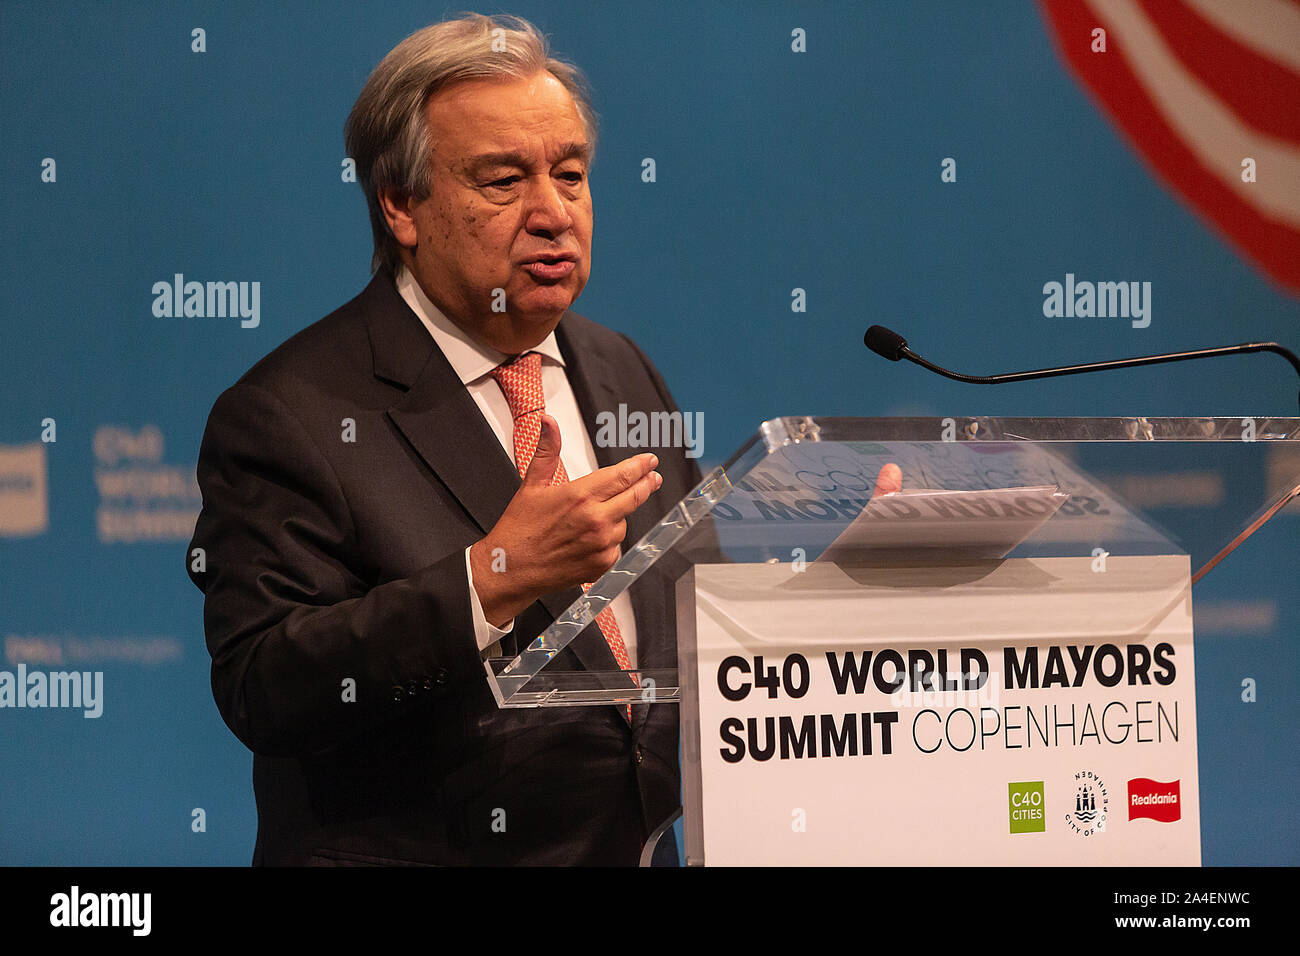 COPENHAGEN, DENMARK – OCTOBER 10. DENMARK: UN Secretary-General Antonio Guterres speaks during a press conference at the C40 World Mayors Summit on October 10, 2019 in Copenhagen, Denmark. The Secretary-General will also meet the Danish Queen Margrethe and the Prime Minister, Mette Frederiksen. More than 90 mayors of some of the world’s largest and most influential cities representing some 700 million people meet in Copenhagen from October 9-12 for the C40 World Mayors Summit. The purpose with the Summit in Copenhagen is to build a global coalition of leading cities, businesses and citizens th Stock Photo